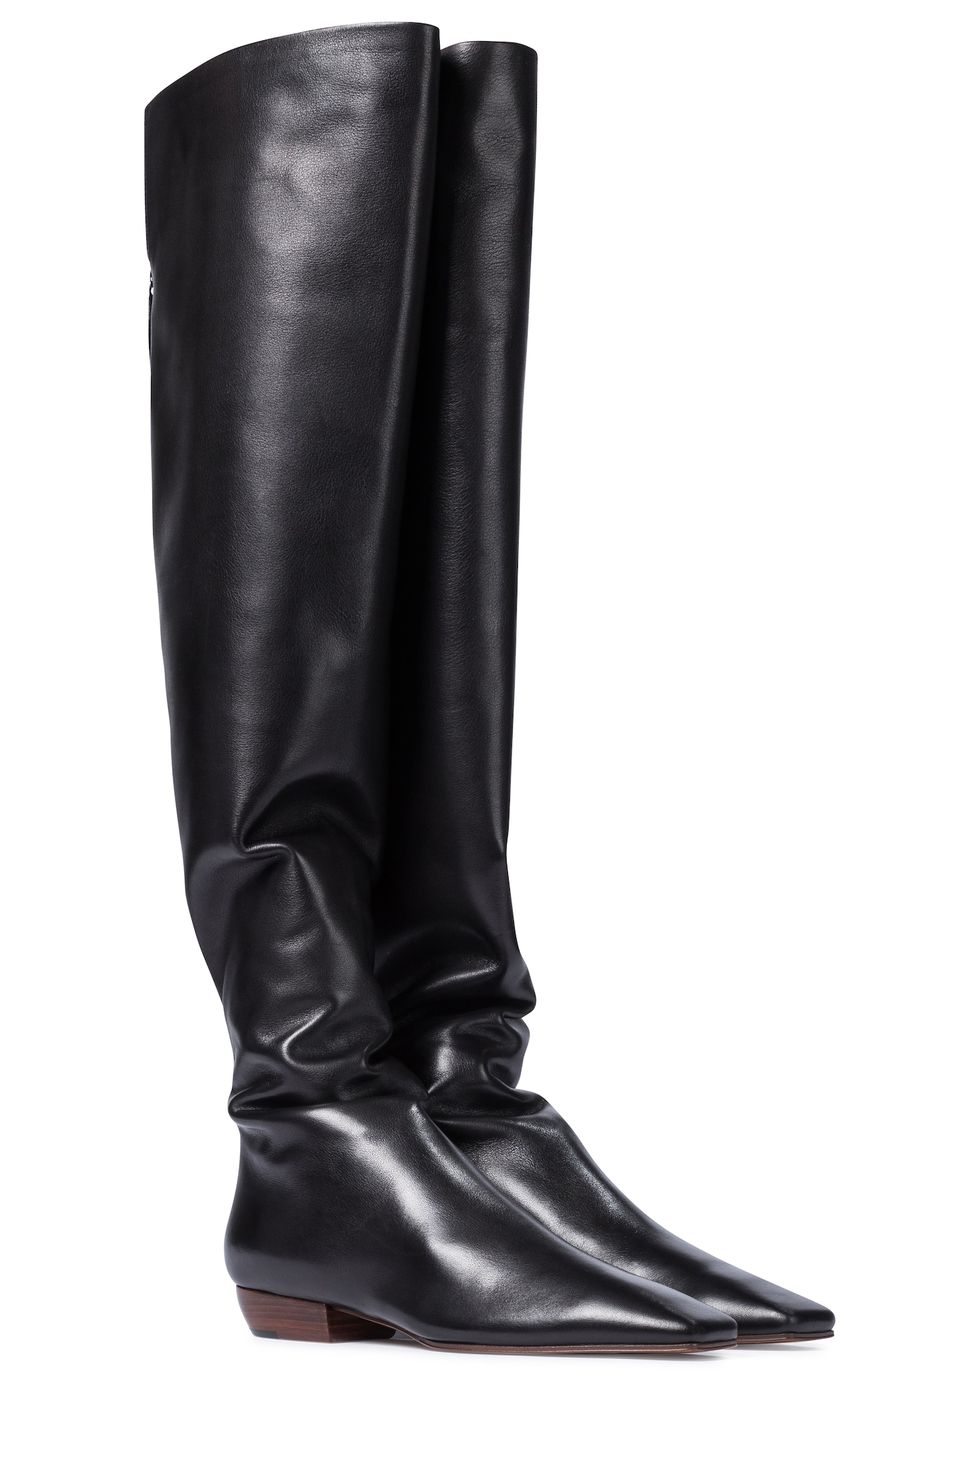 Best Over-the-Knee Boots - Sexy Thigh High Boots For Fall 2021